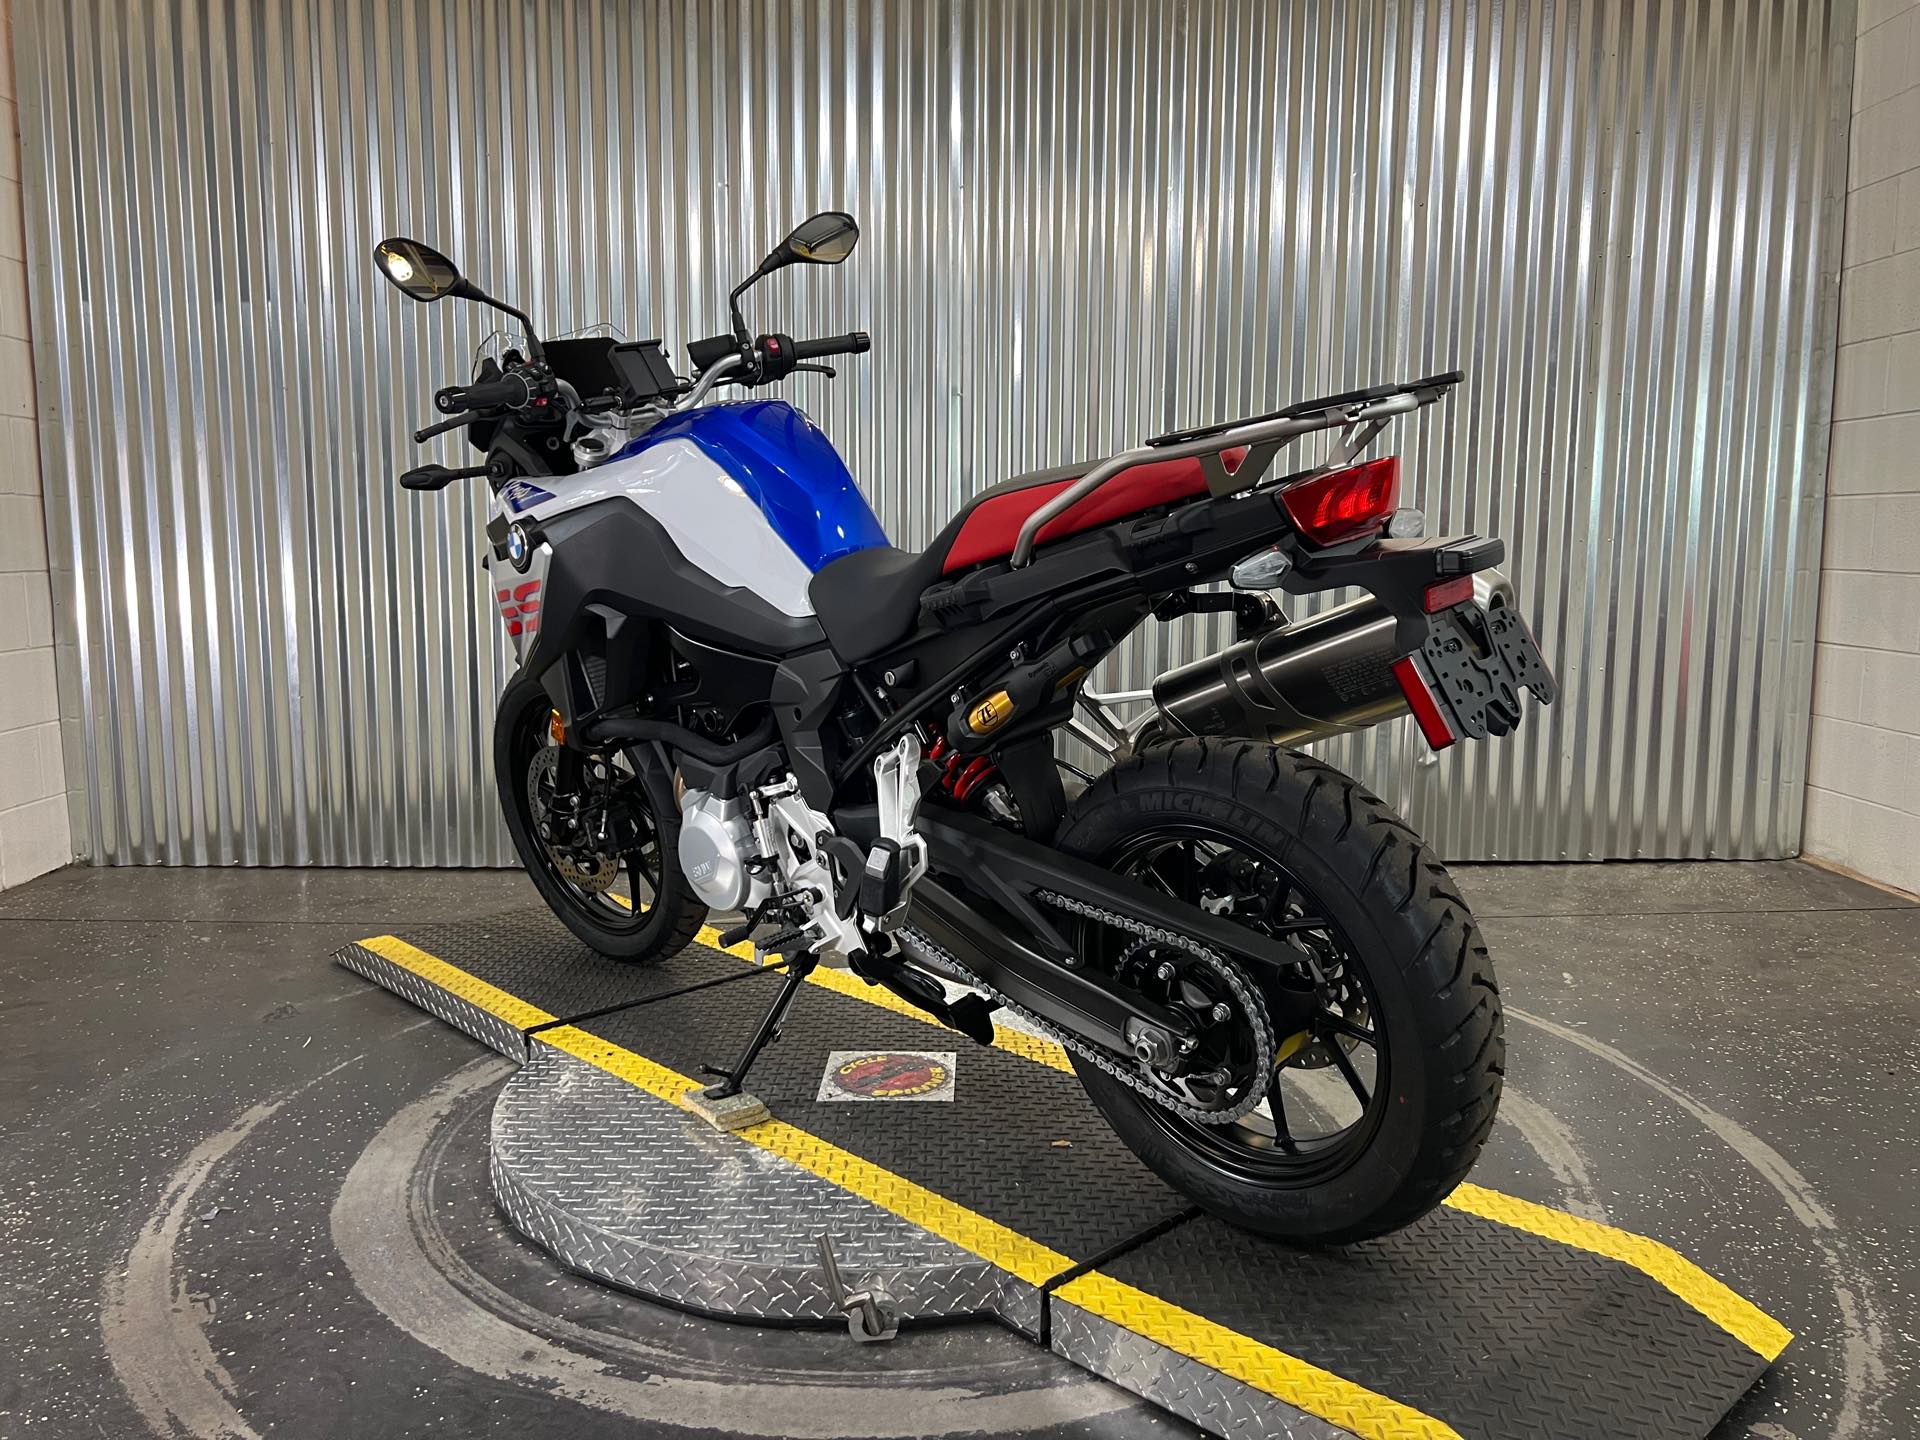 2023 BMW F 750 GS at Teddy Morse Grand Junction Powersports